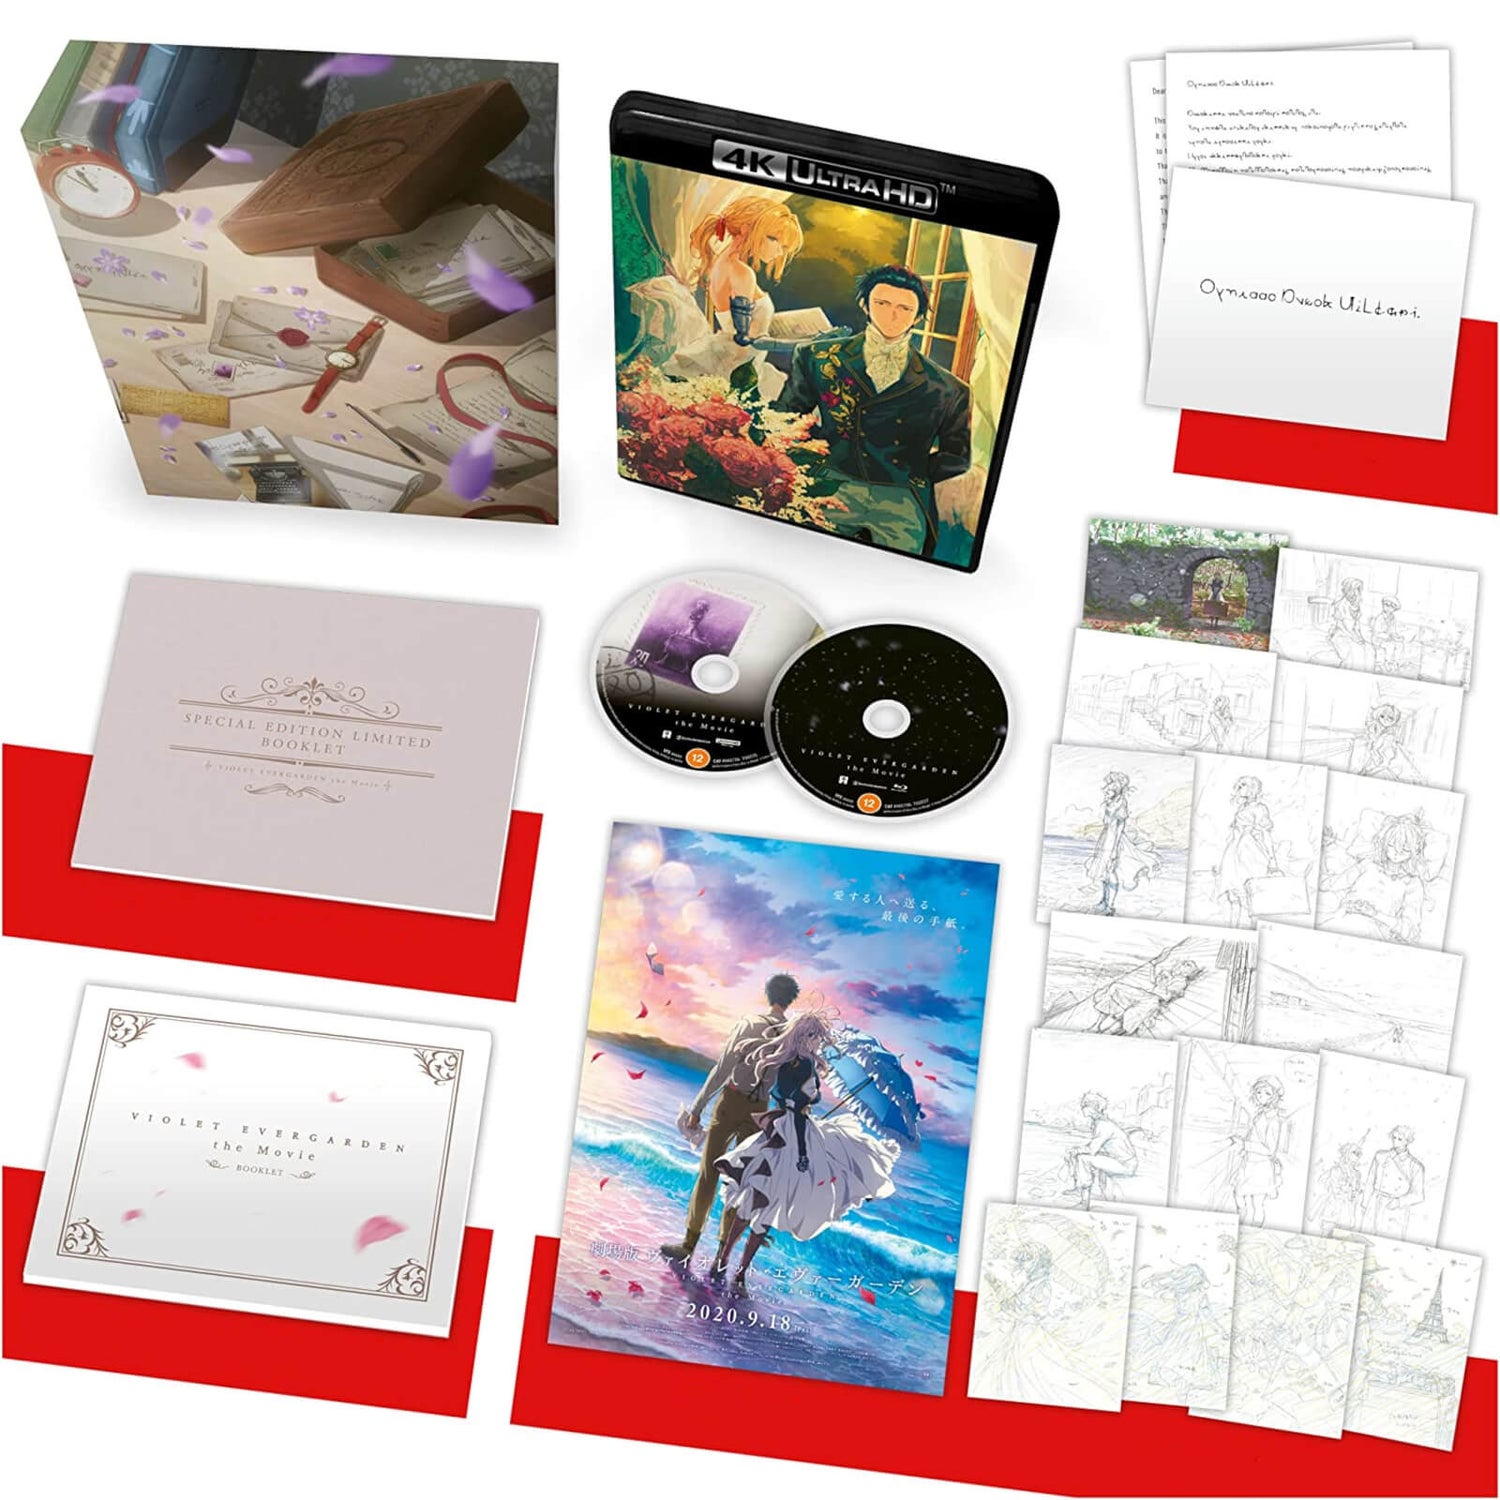 Violet Evergarden: The Movie - 4K Ultra HD Collector's Limited Edition (Includes Blu-ray)